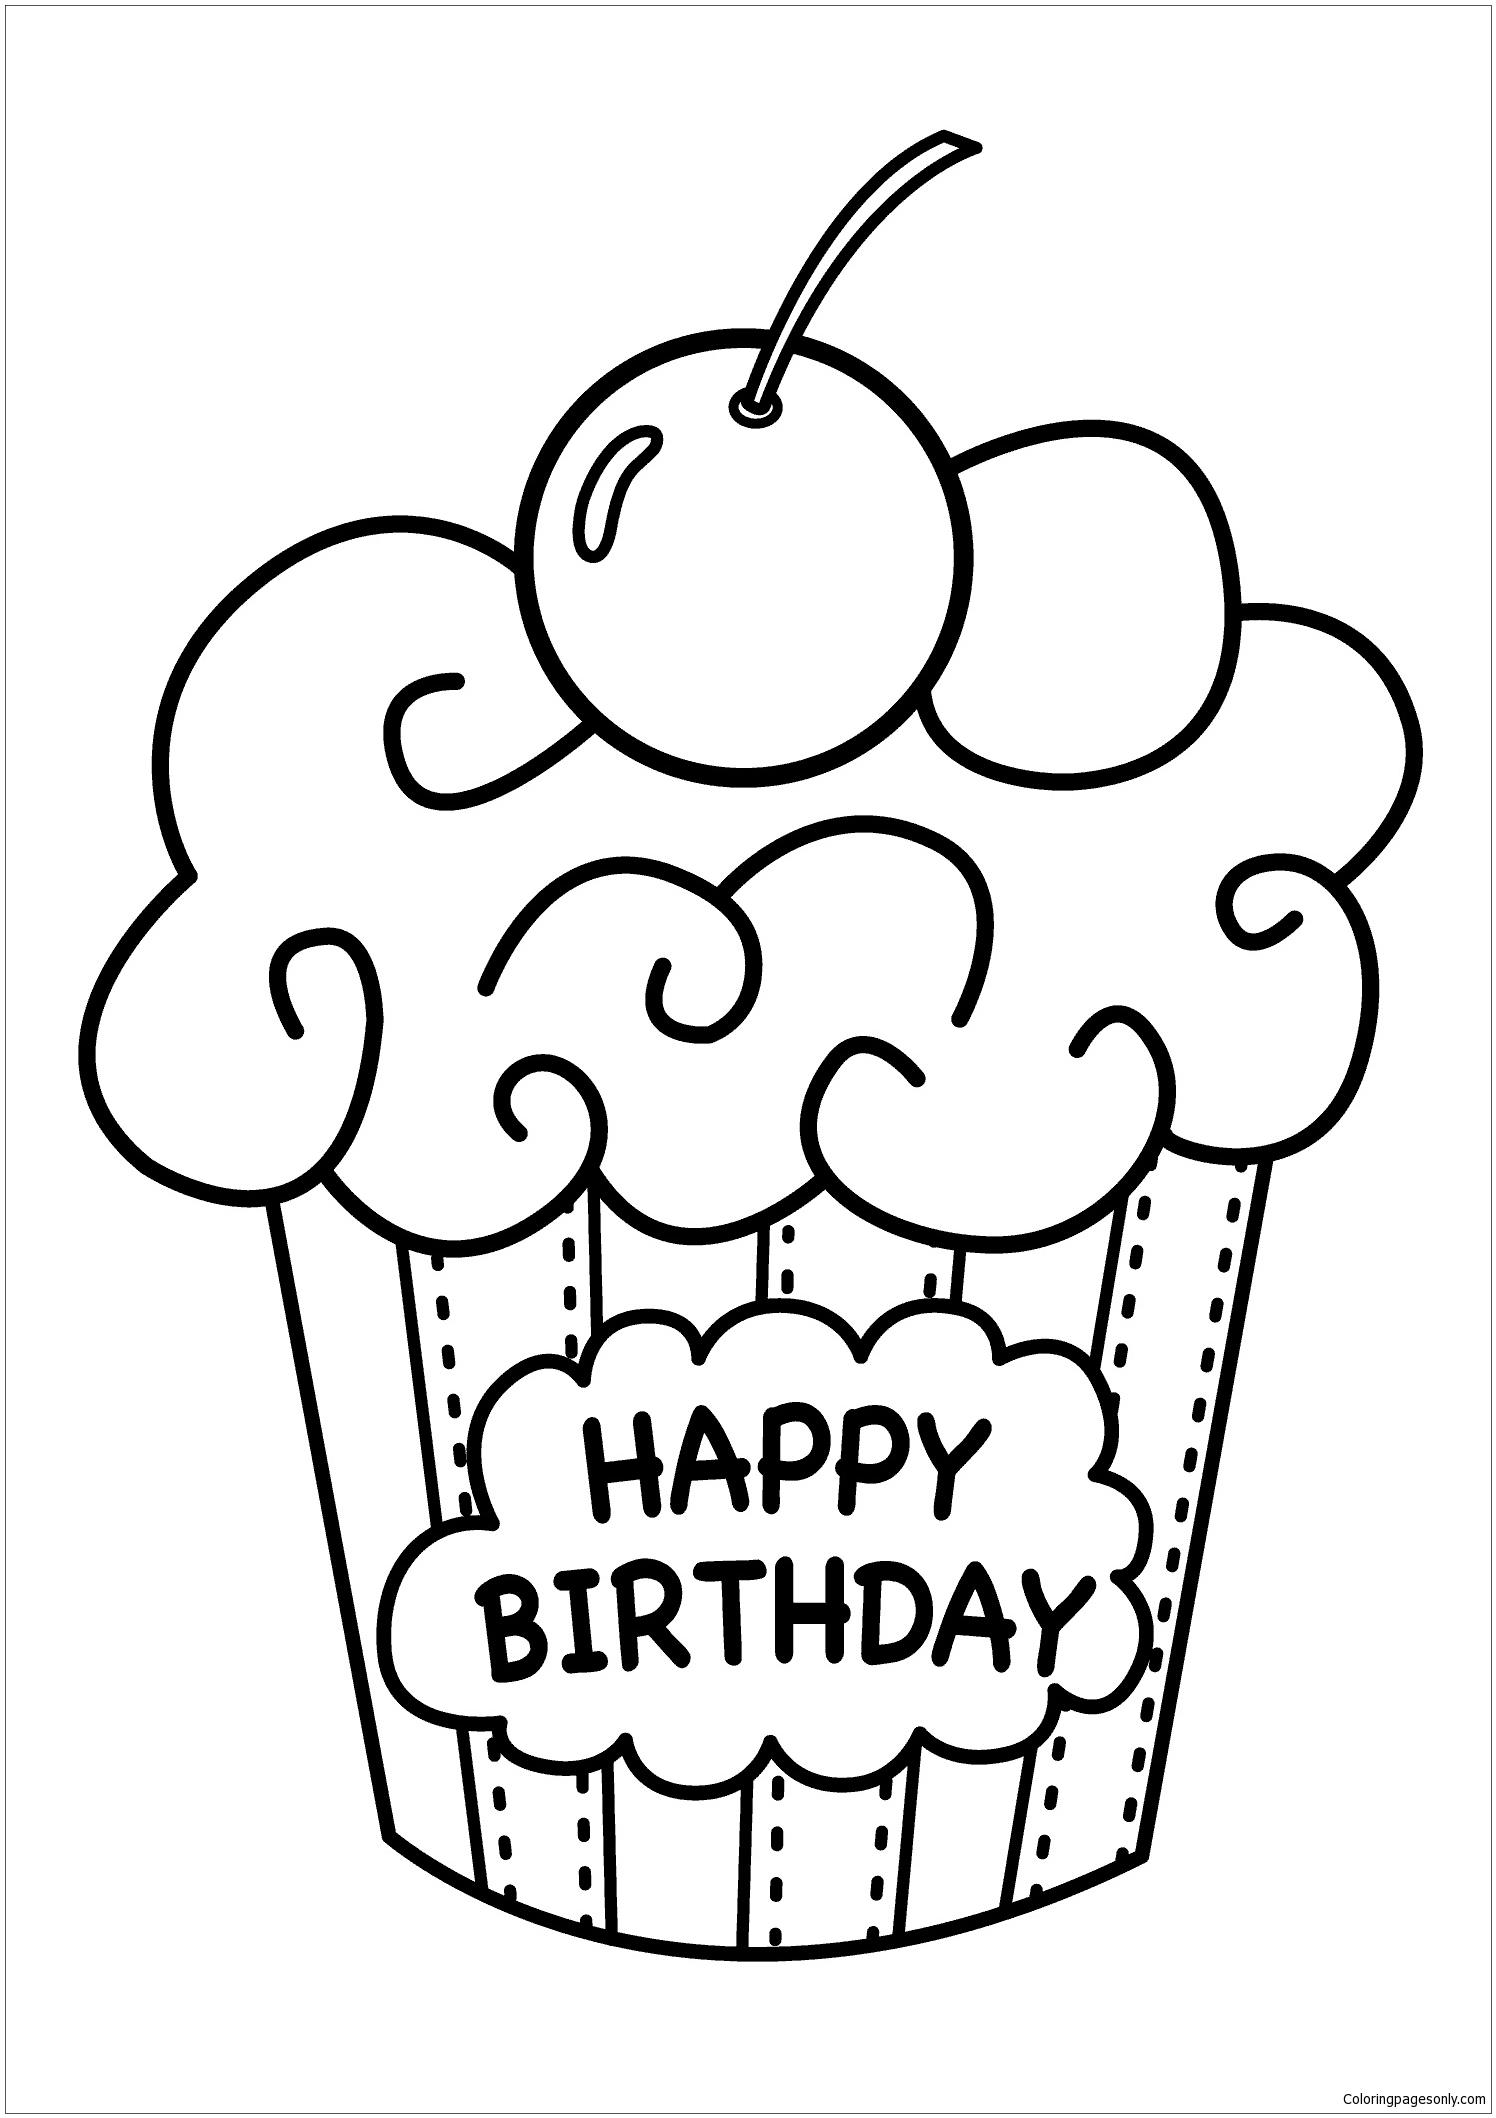 Cake Birthday Coloring Pages